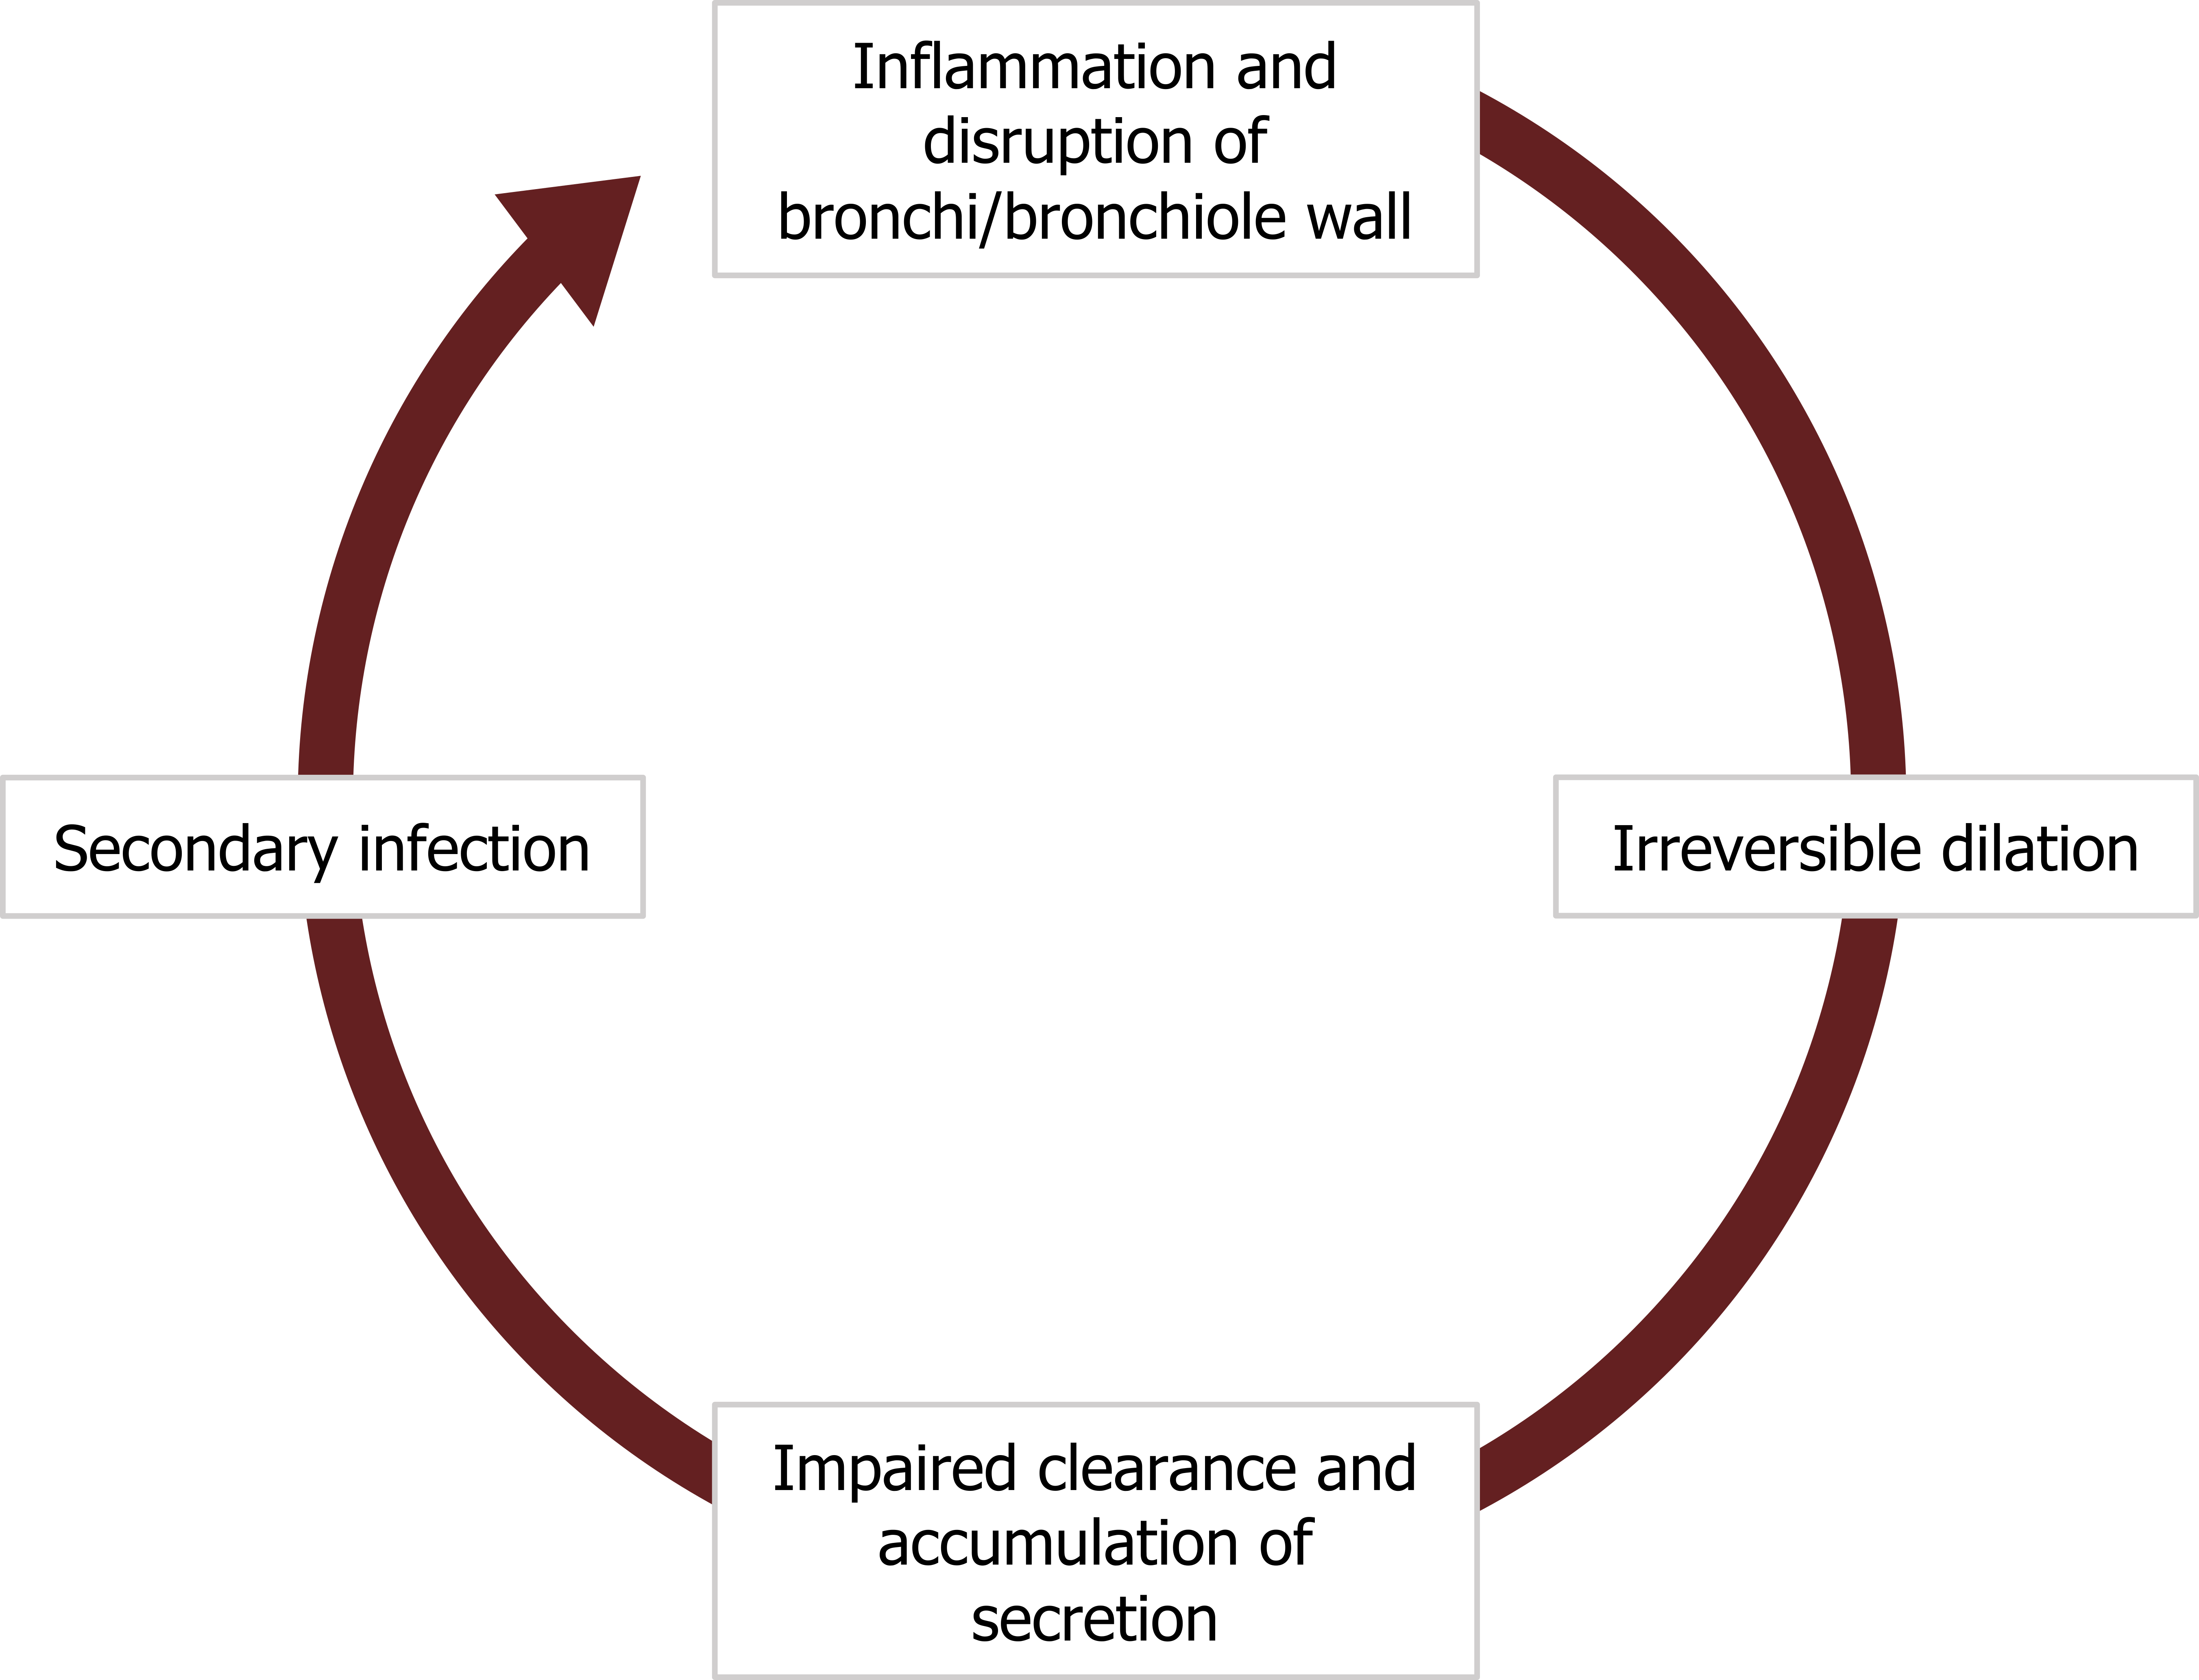 Circular arrows beginning with inflammation and disruption of bronchi/bronchiole wall arrow to irreversible dilation arrow to impaired clearance and accumulation of secretion arrow to secondary infection arrow to beginning